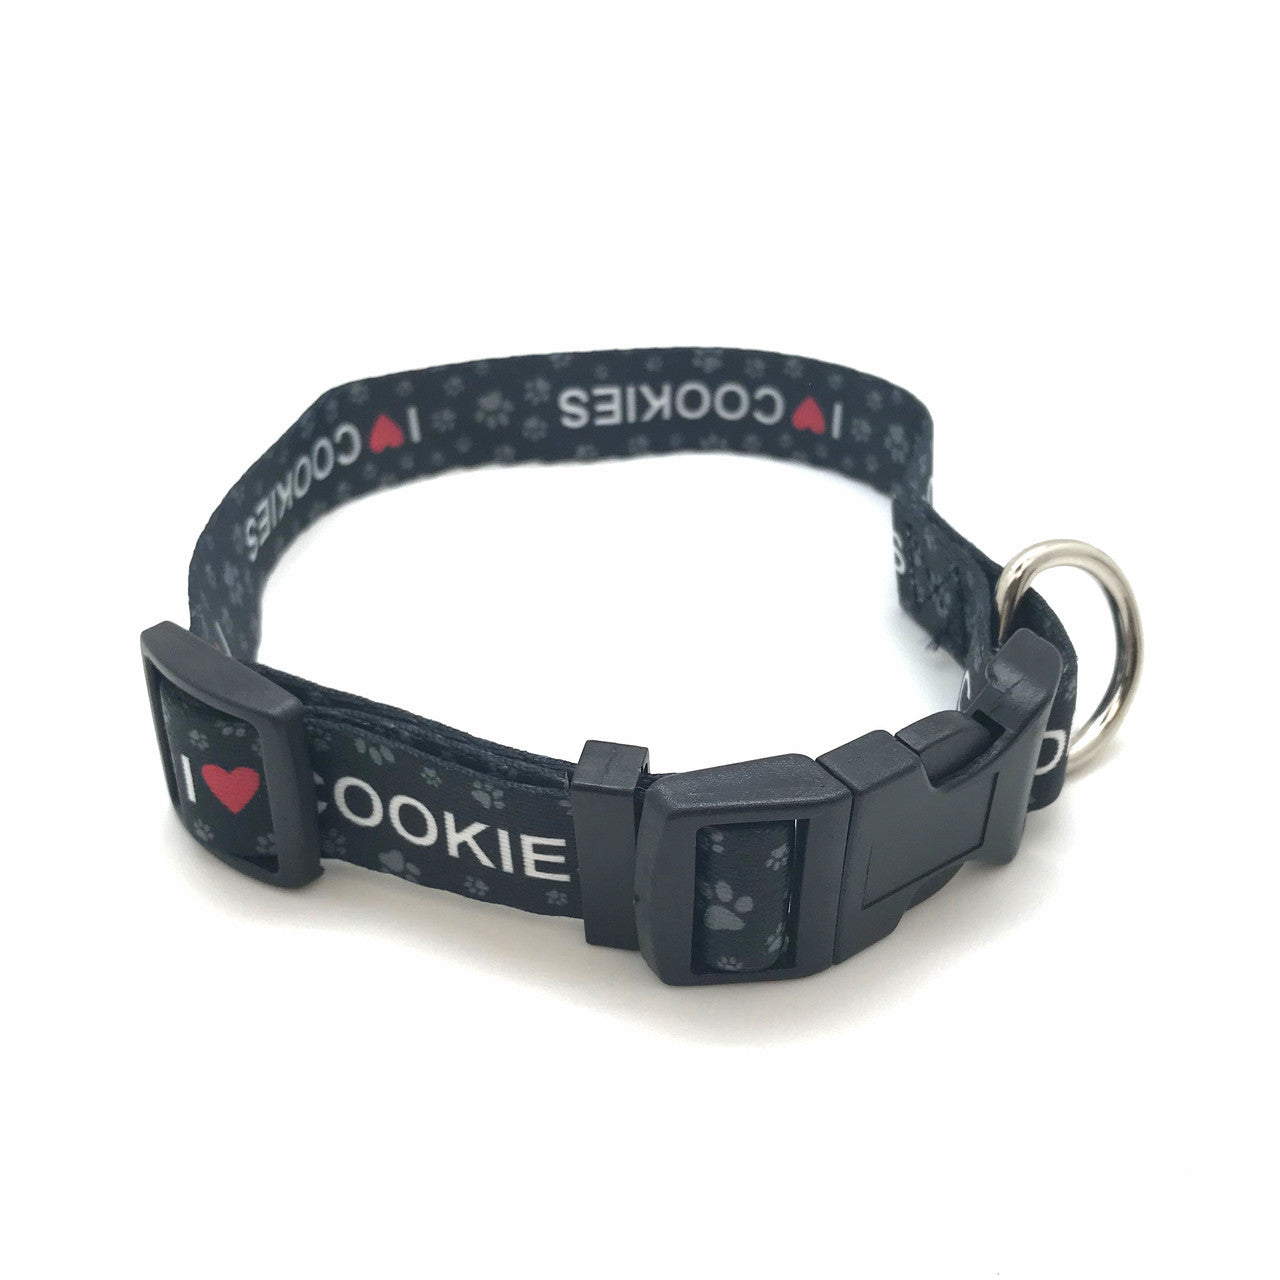 I ( red Heart) Cookies Dog Collar with paw prints 1" wide webbing